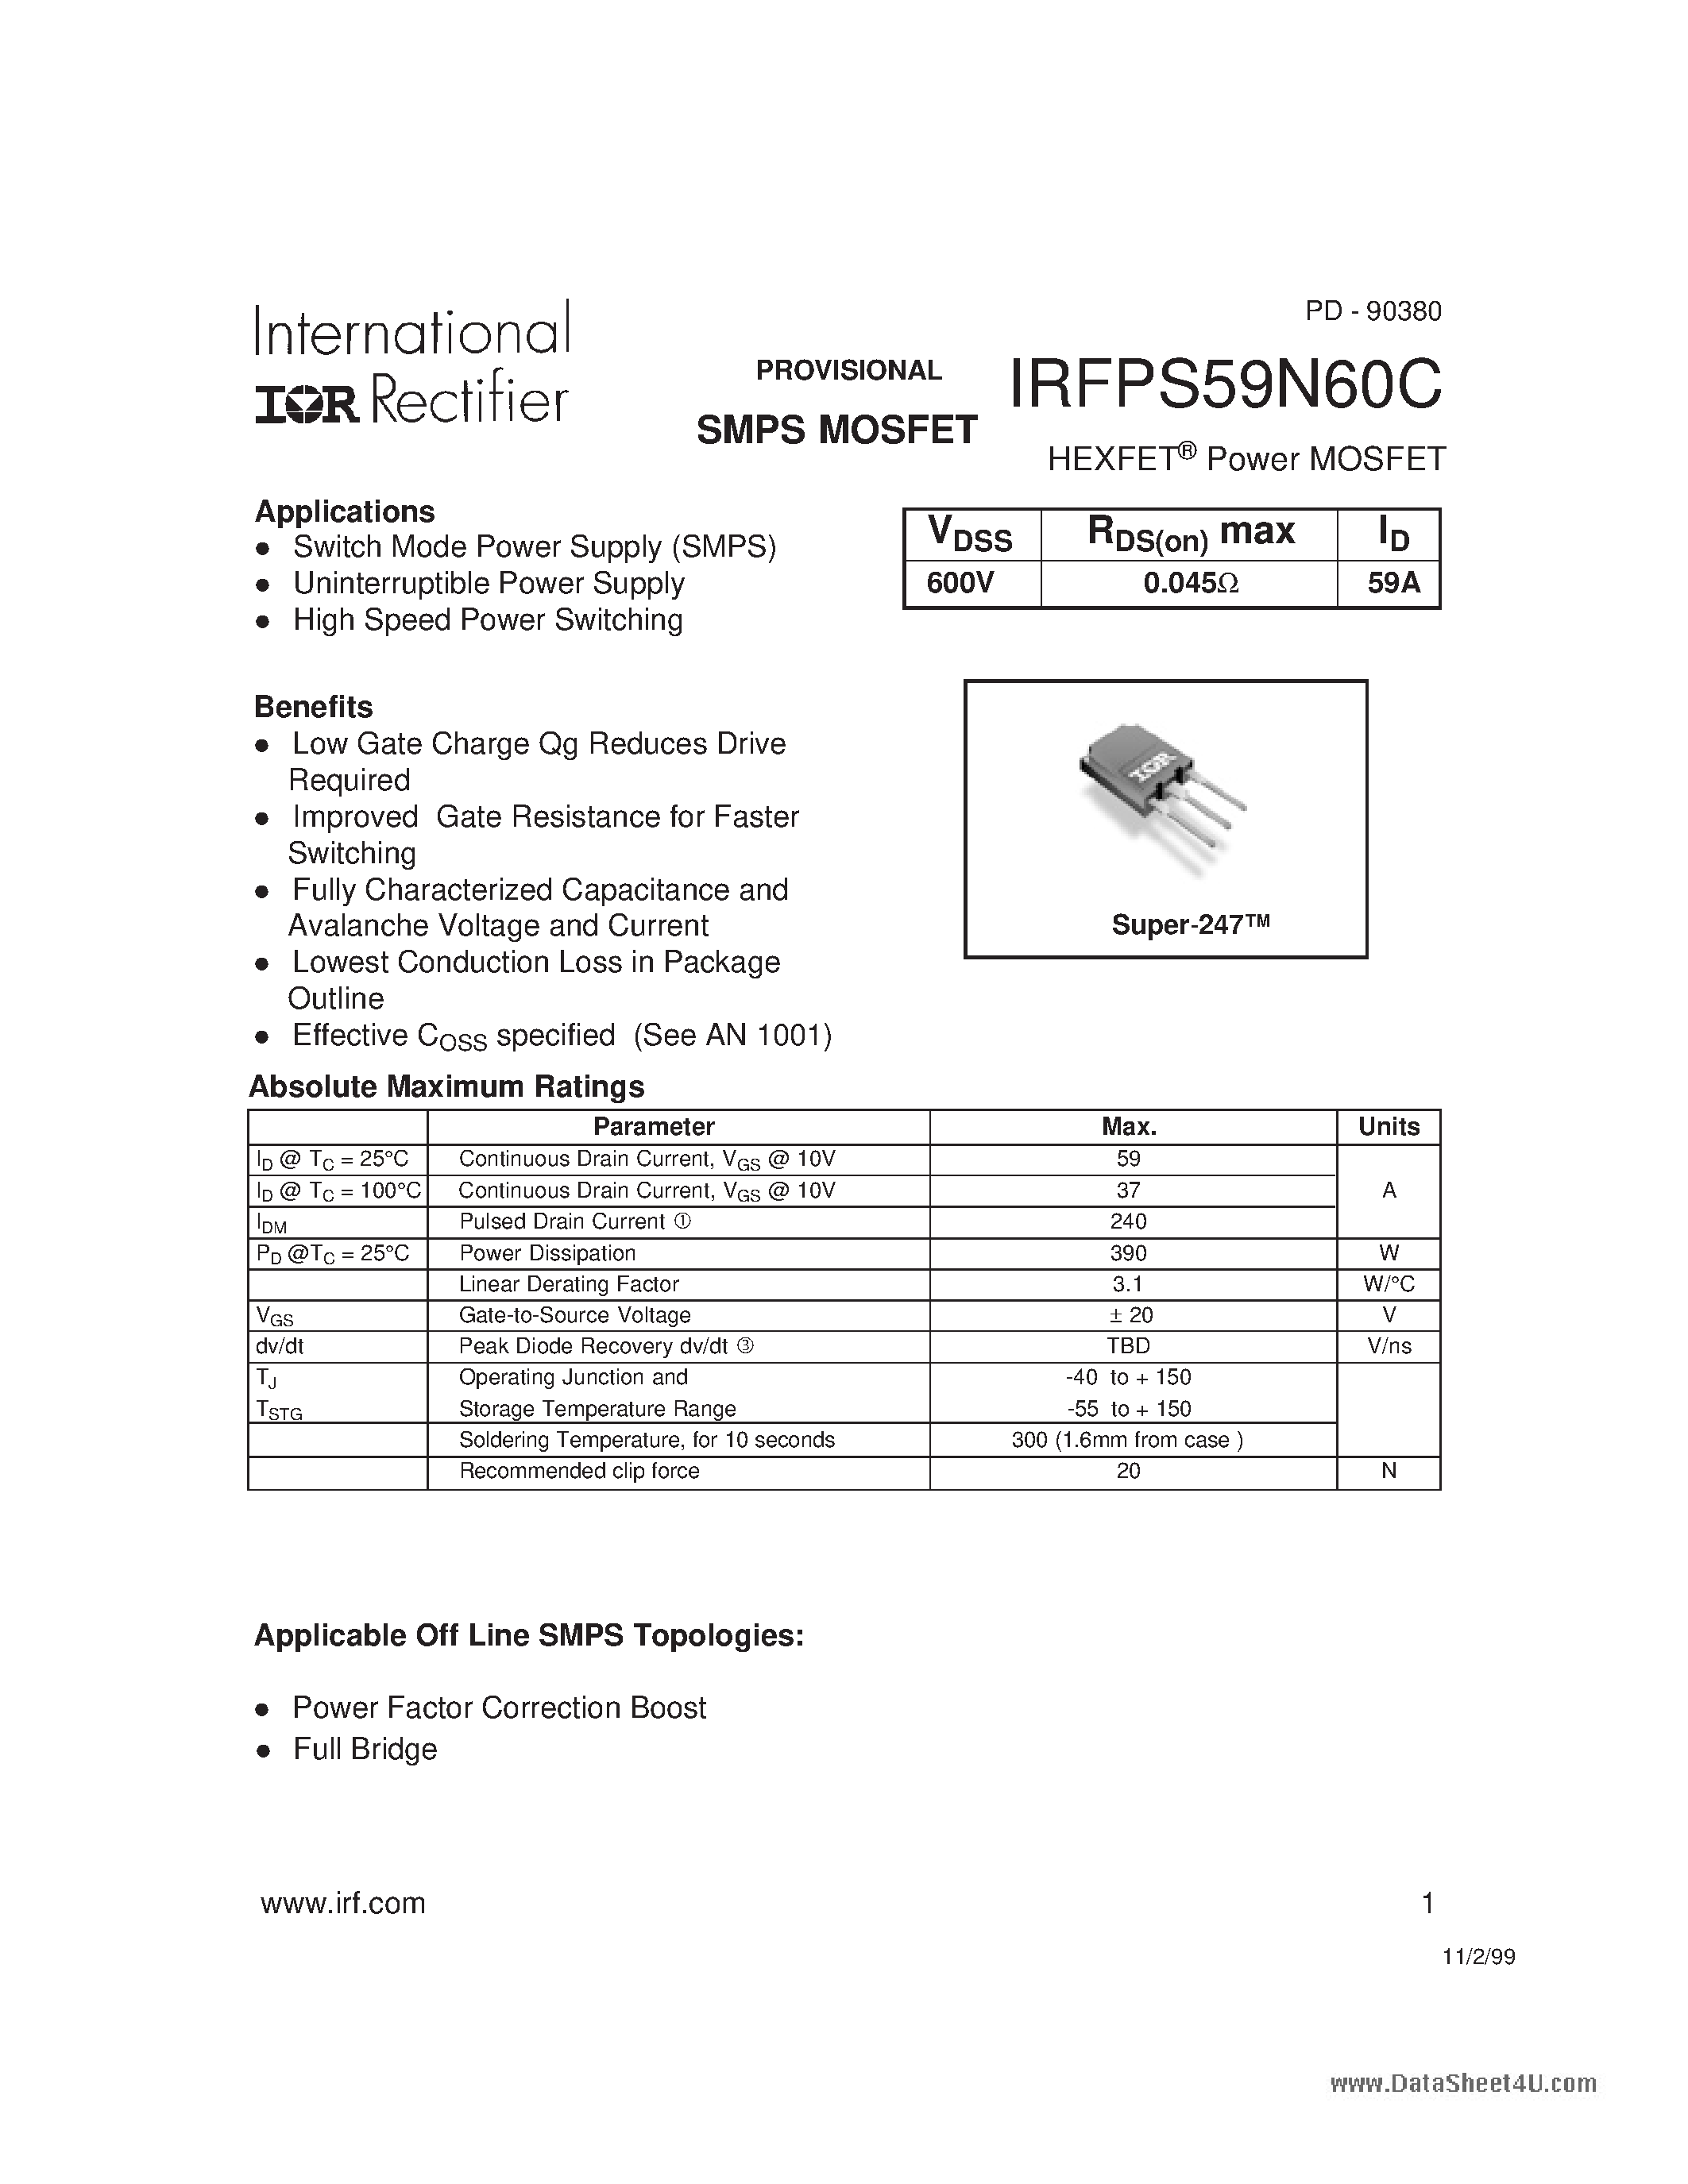 Datasheet IRFPS59N60C - HEXFET Power MOSFET page 1